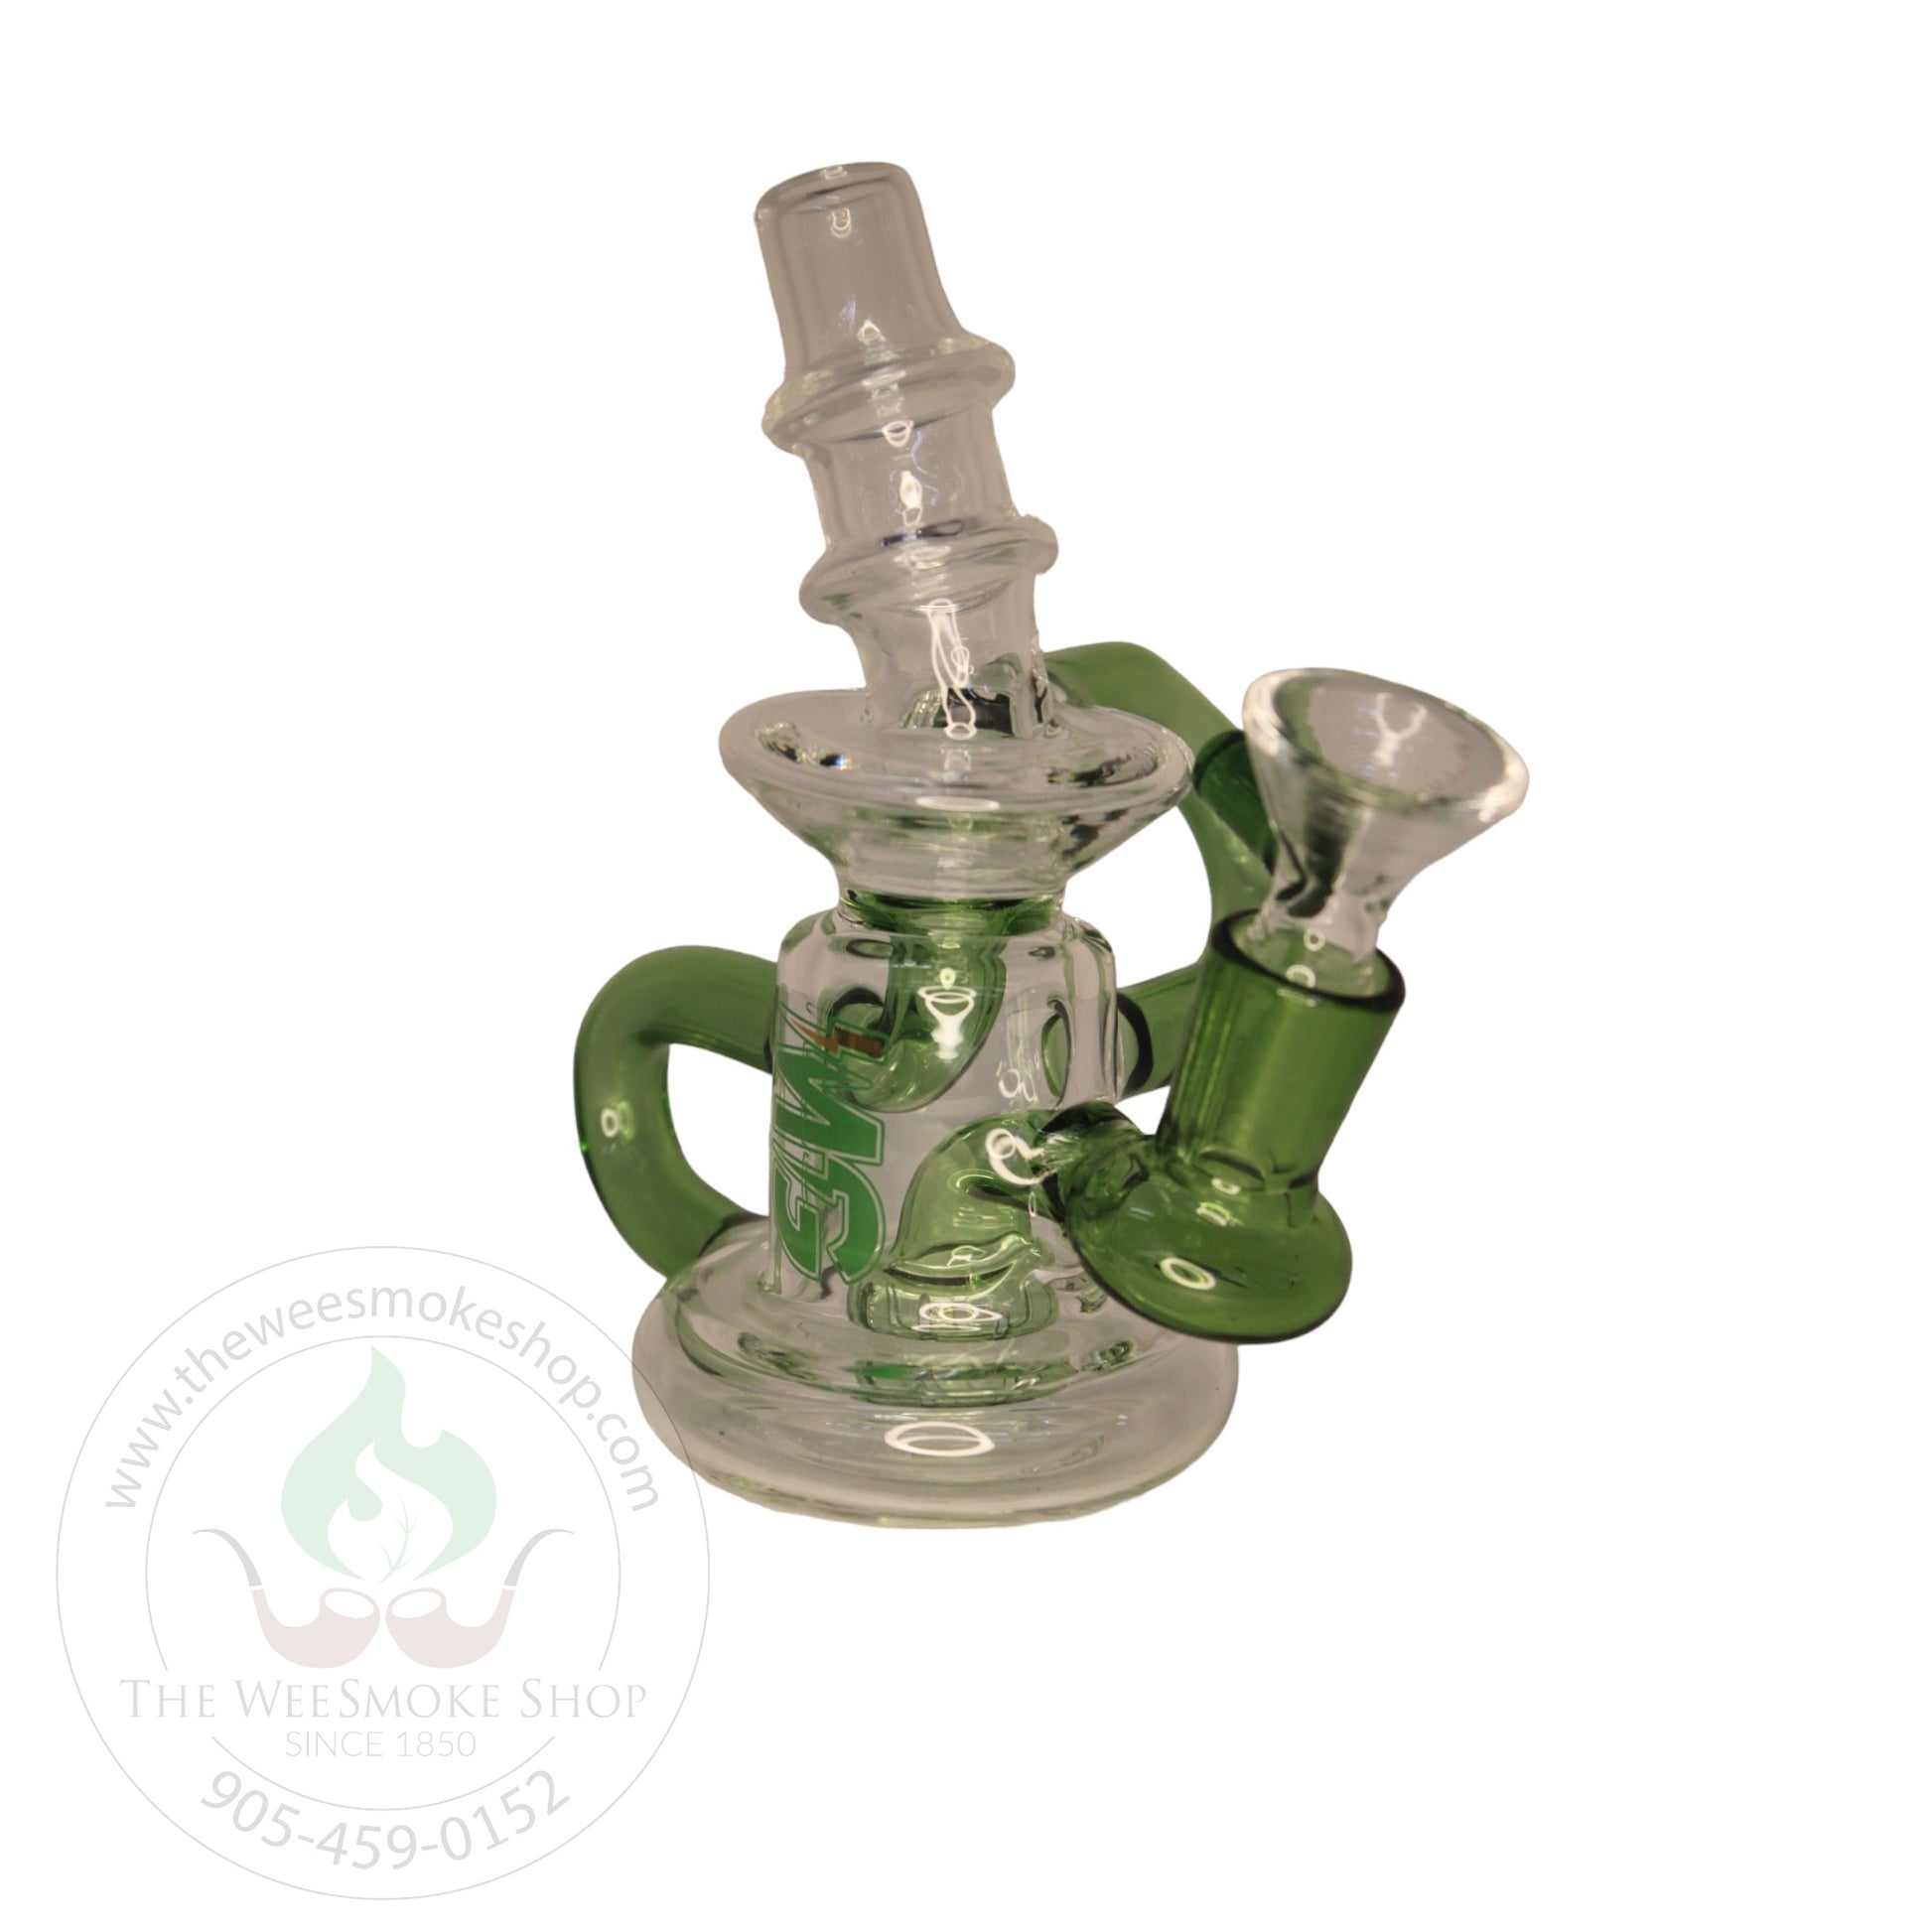 Make Glass Recycler Rig (6") - The Wee Smoke Shop